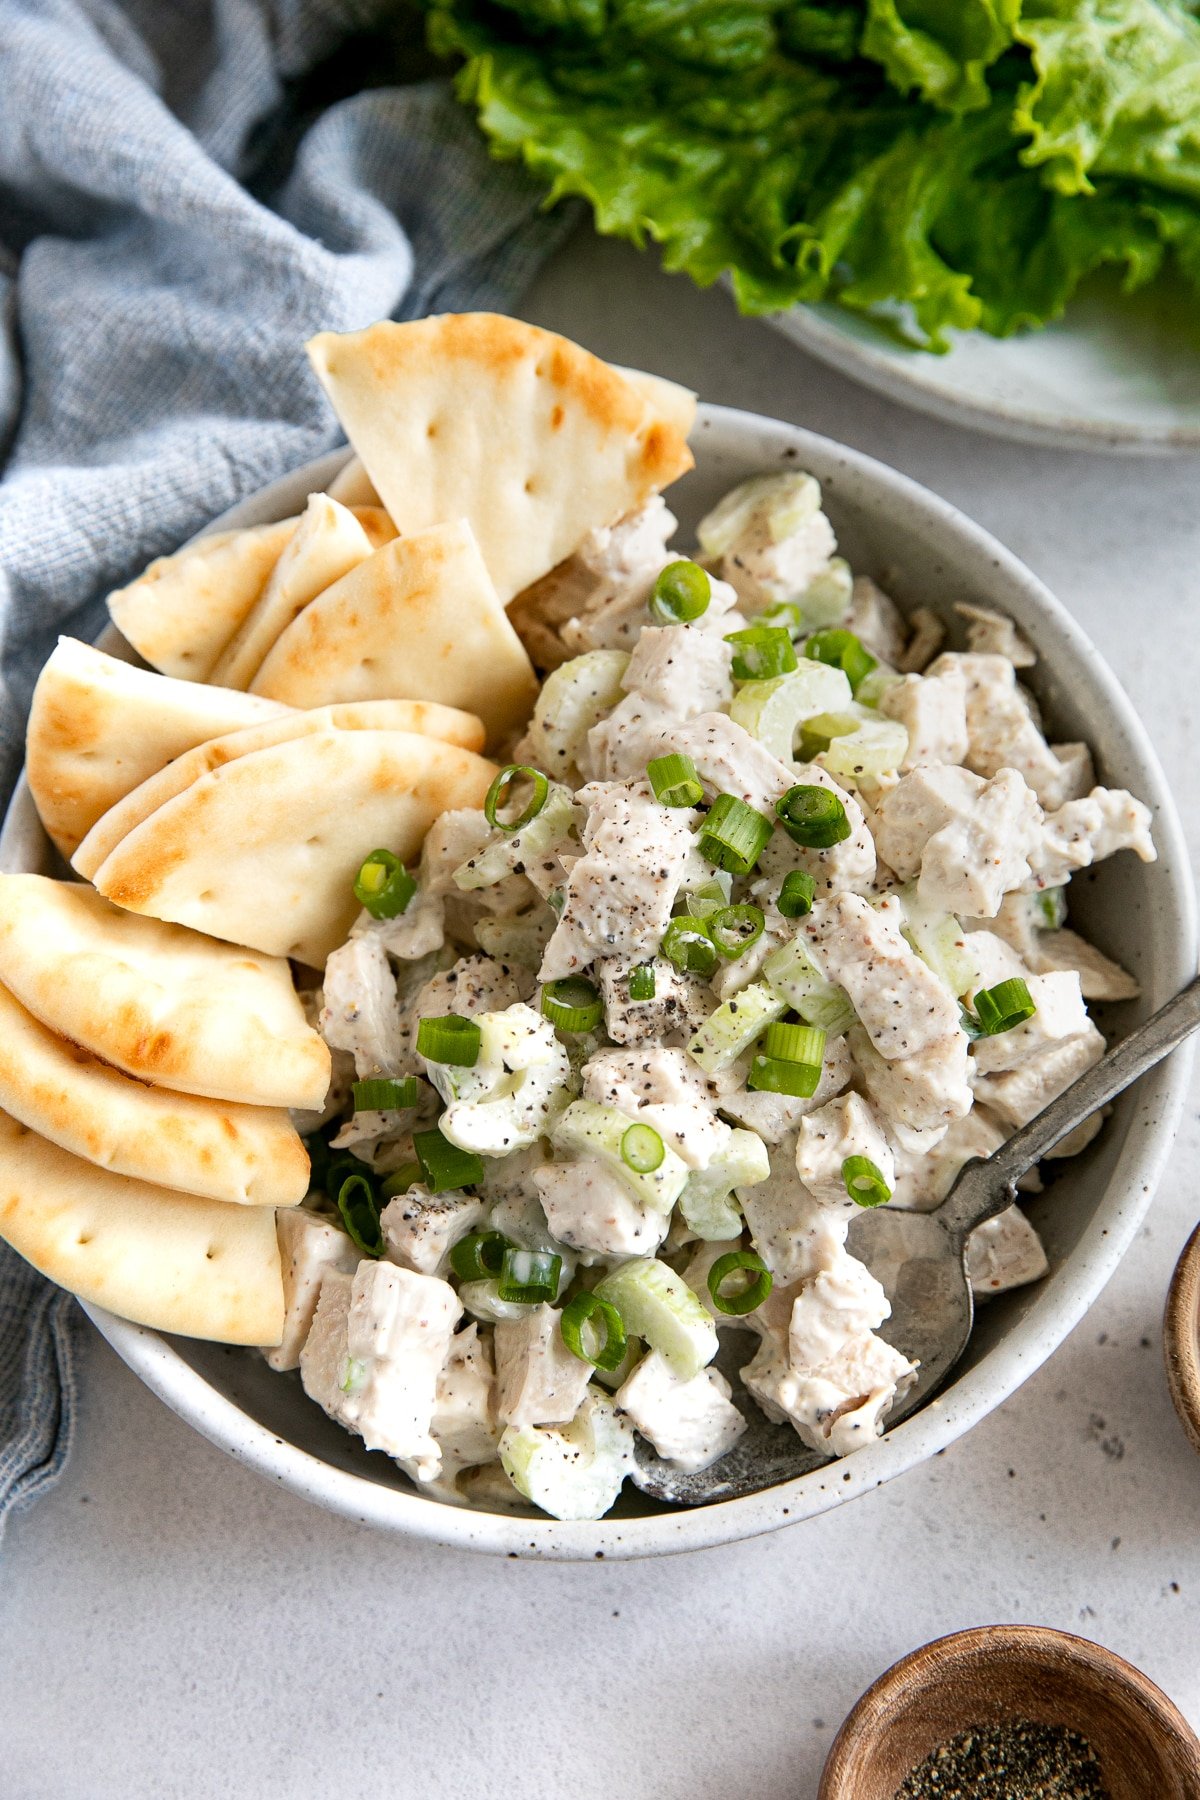 Pita bread served with homemade easy chicken salad topped with chopped green onions in a shallow serving bowl.